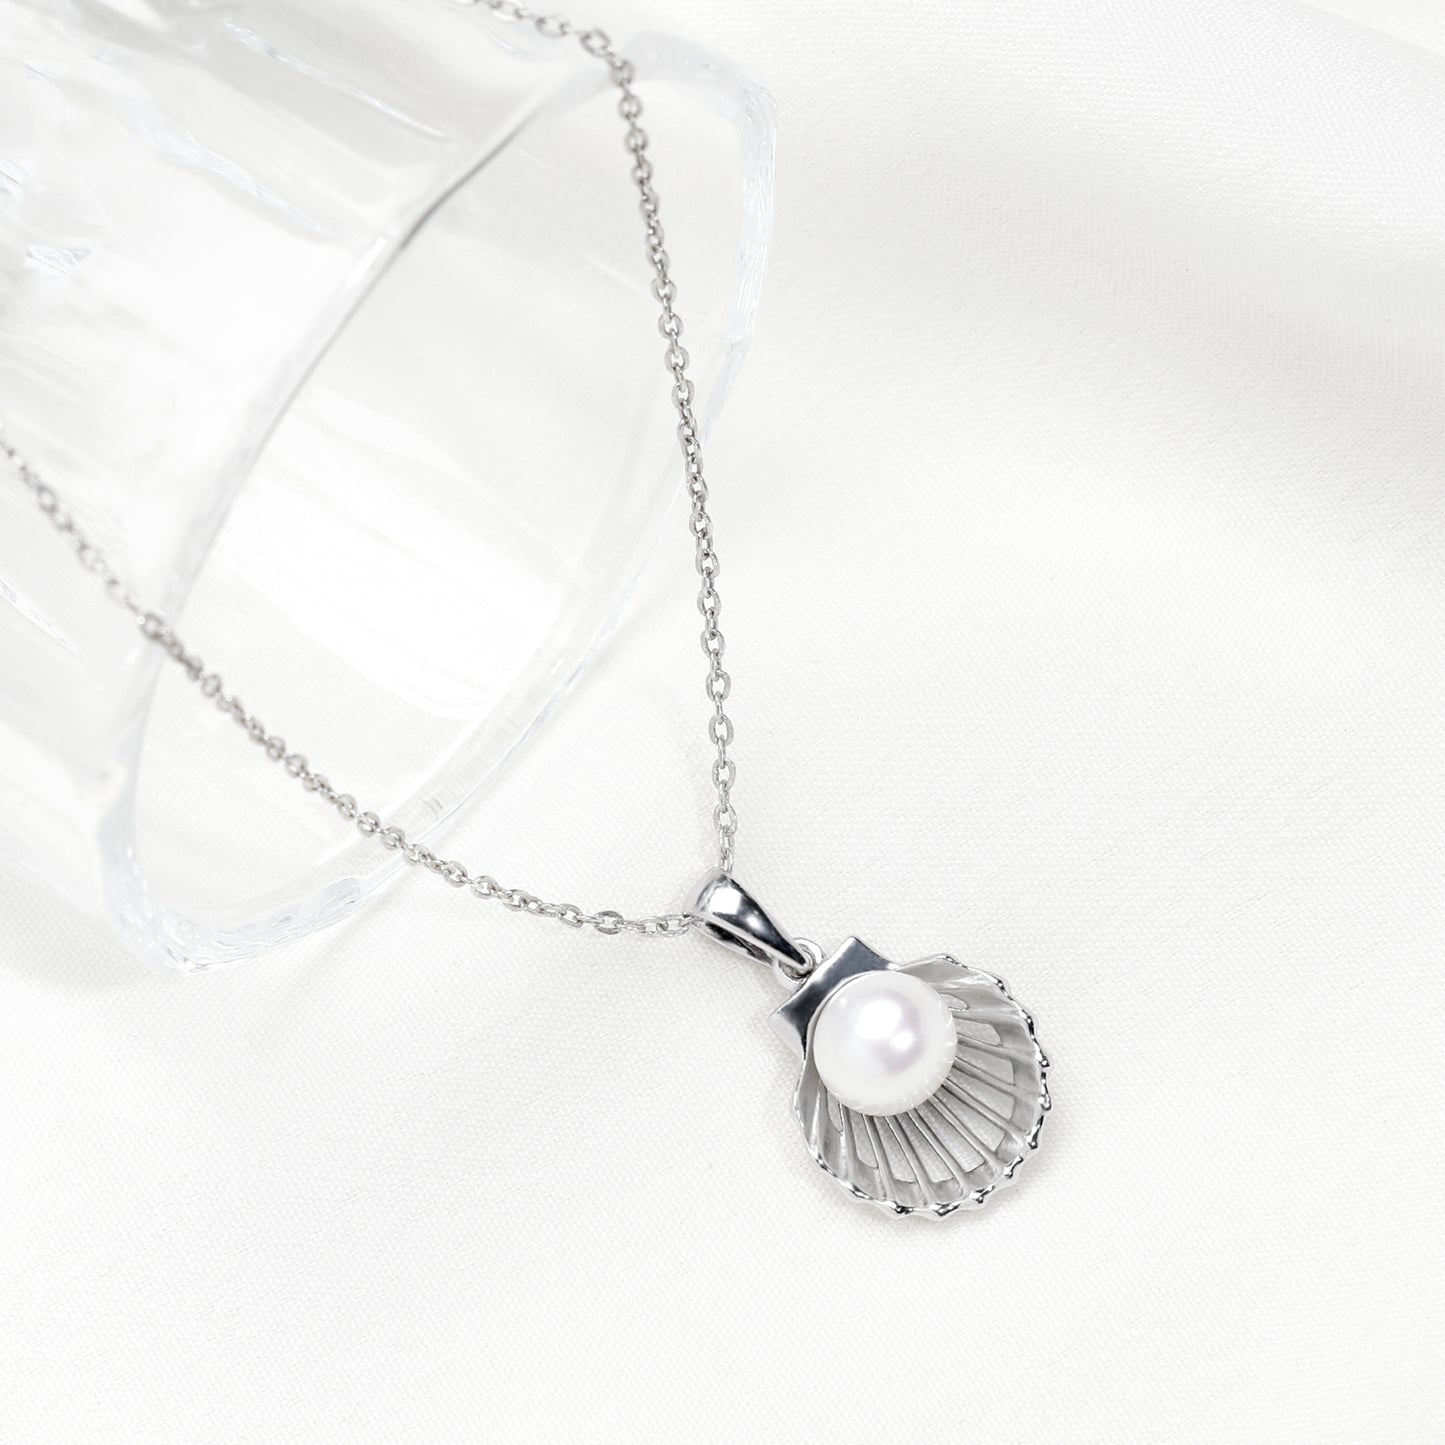 Silver Seashell Pearl Pendant with Link Chain